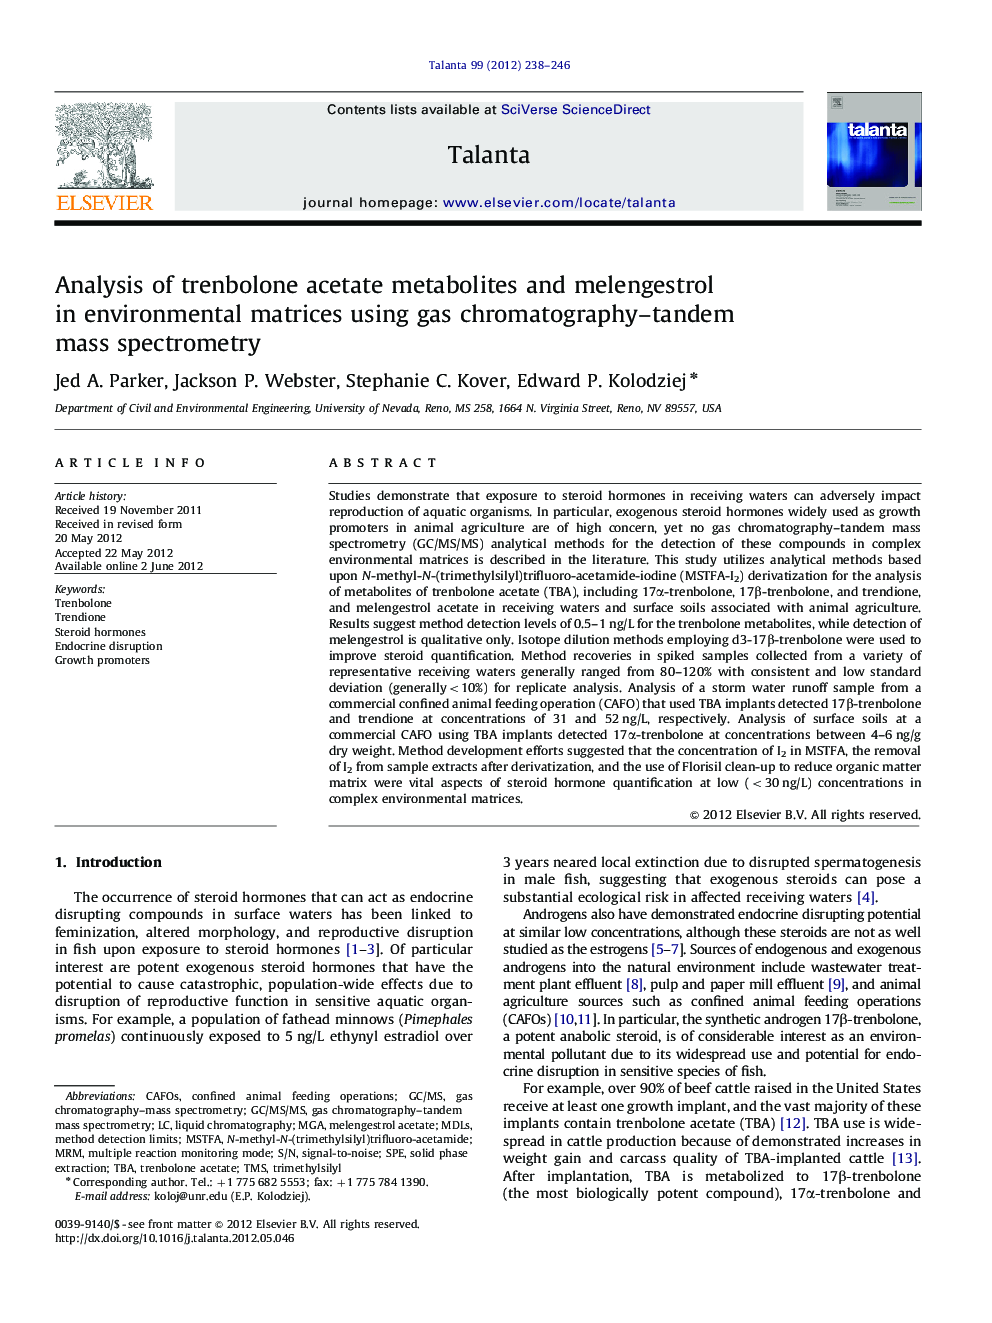 Analysis of trenbolone acetate metabolites and melengestrol in environmental matrices using gas chromatography-tandem mass spectrometry